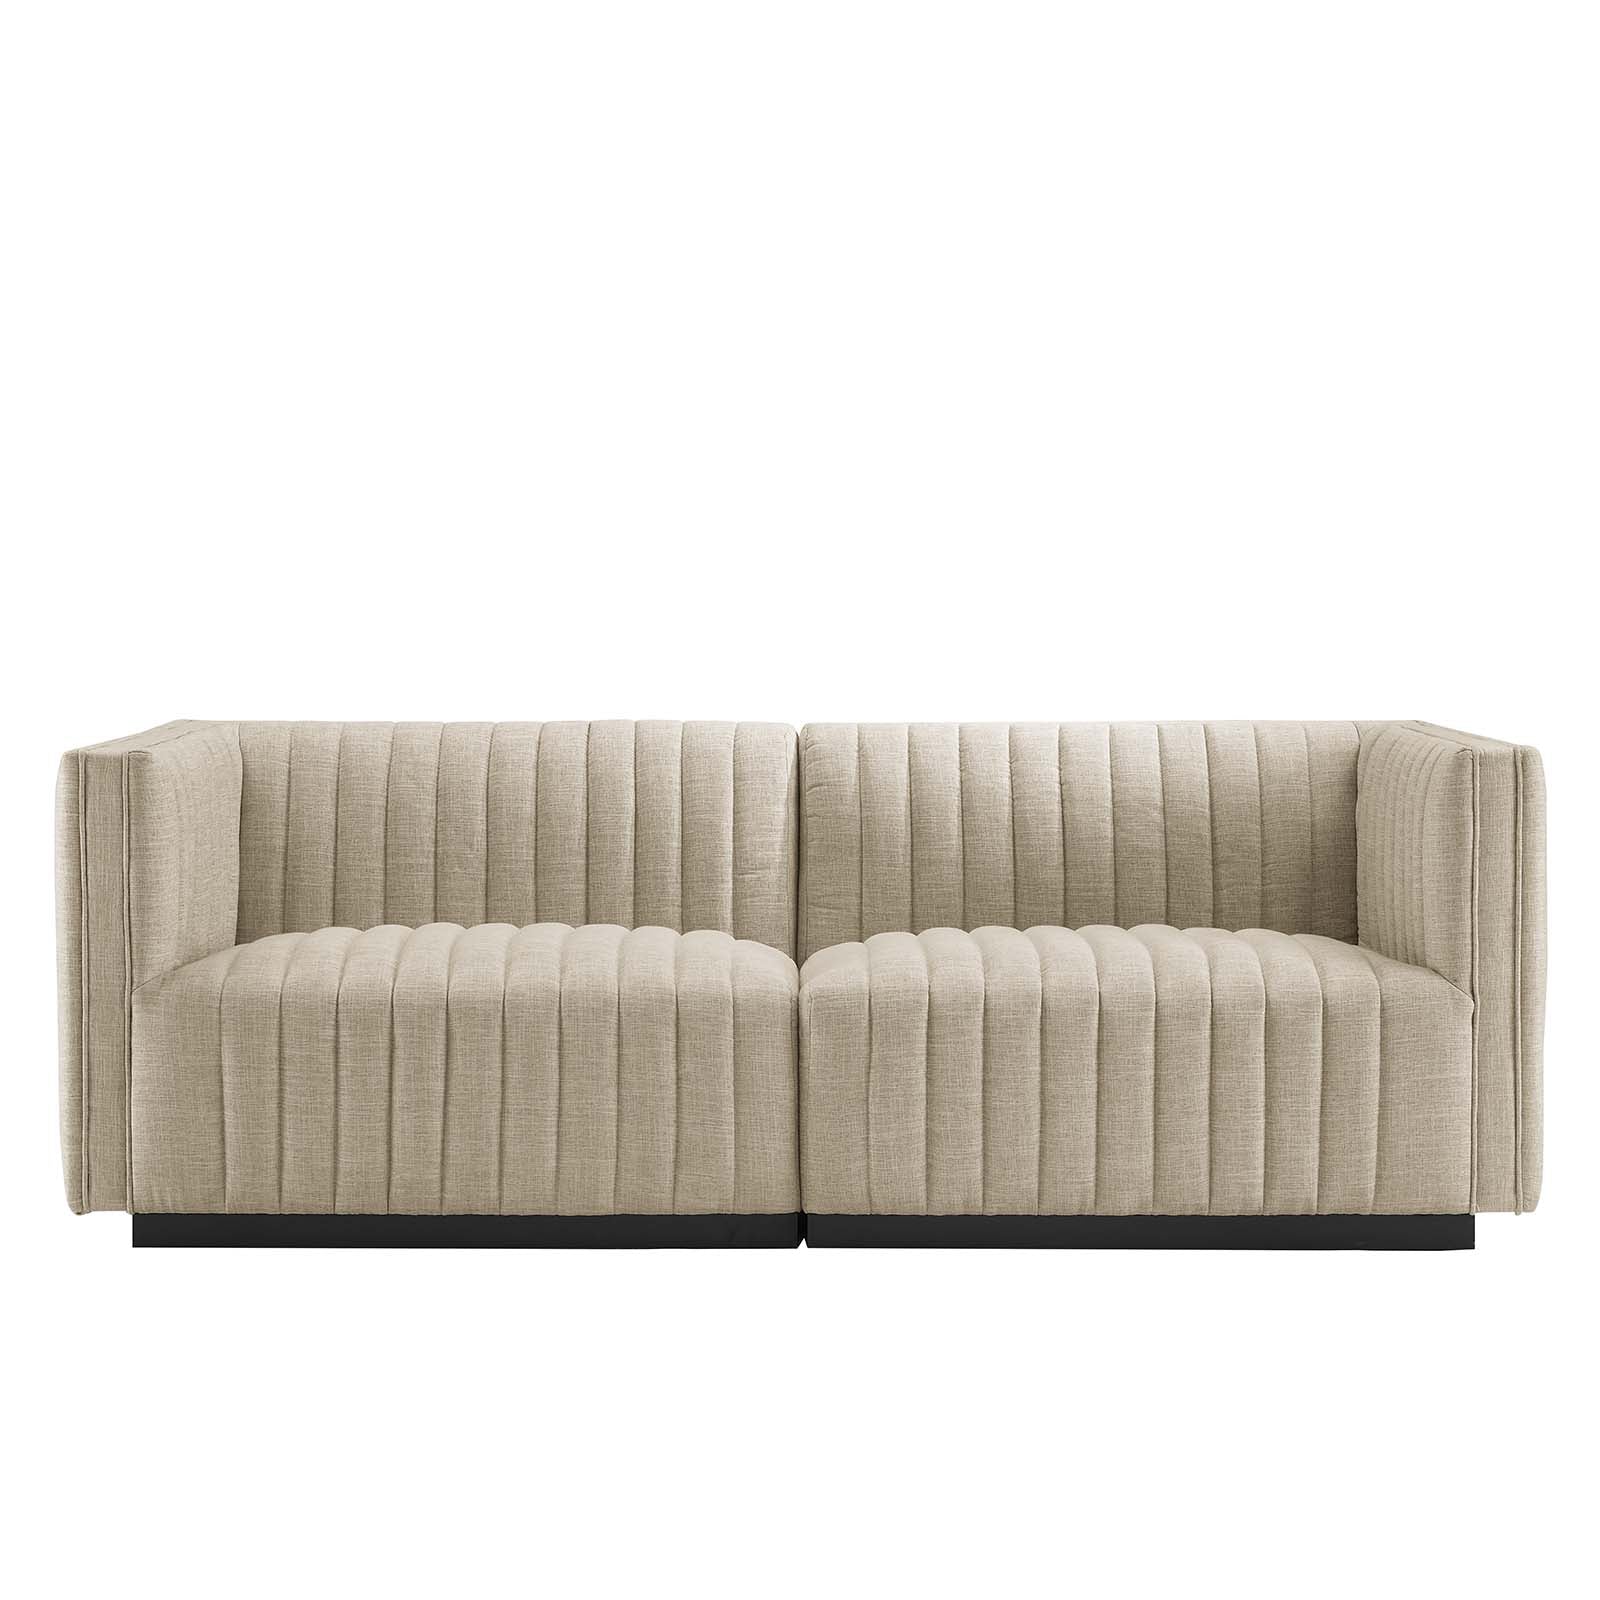 Conjure Channel Tufted Upholstered Fabric Loveseat